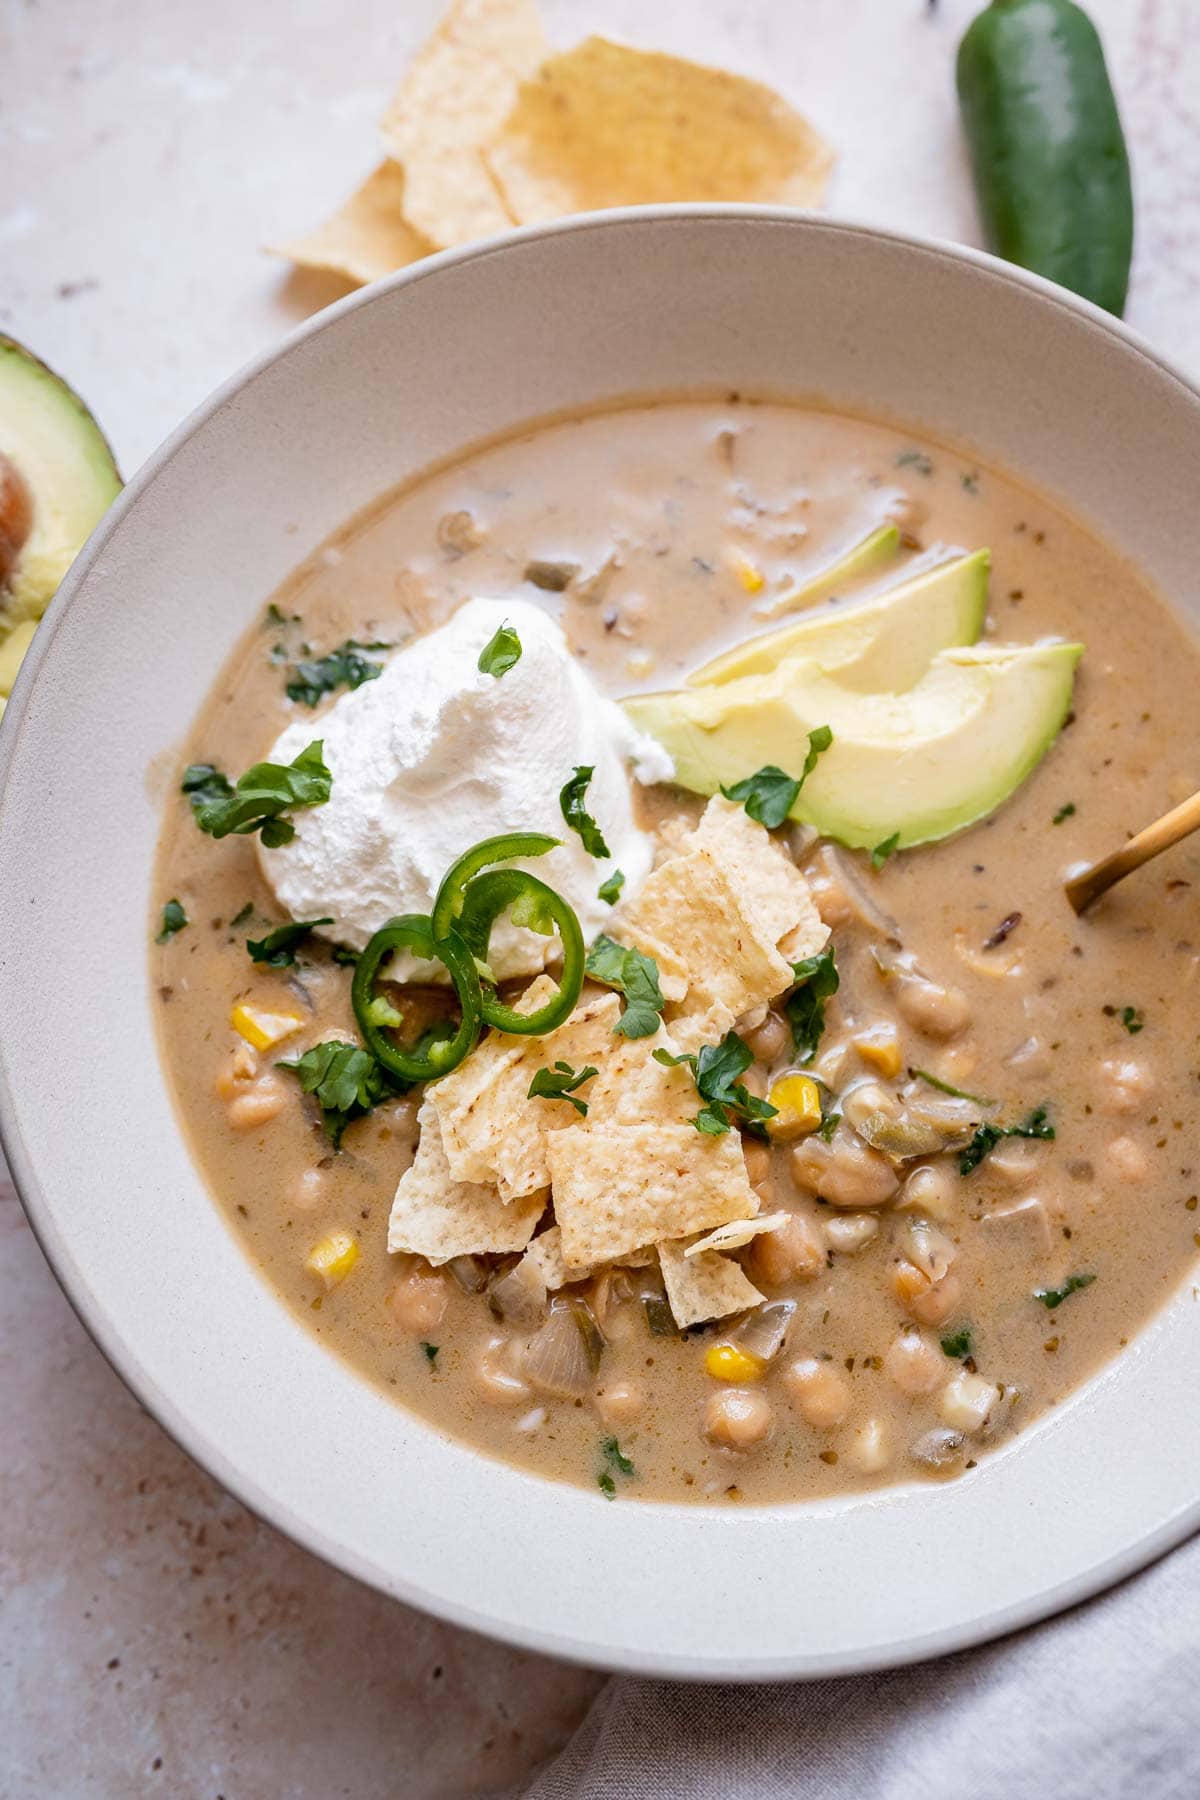 A large ceramic bowl of vegan white chili with fresh herbs, avocado, vegan sour cream and sliced peppers.